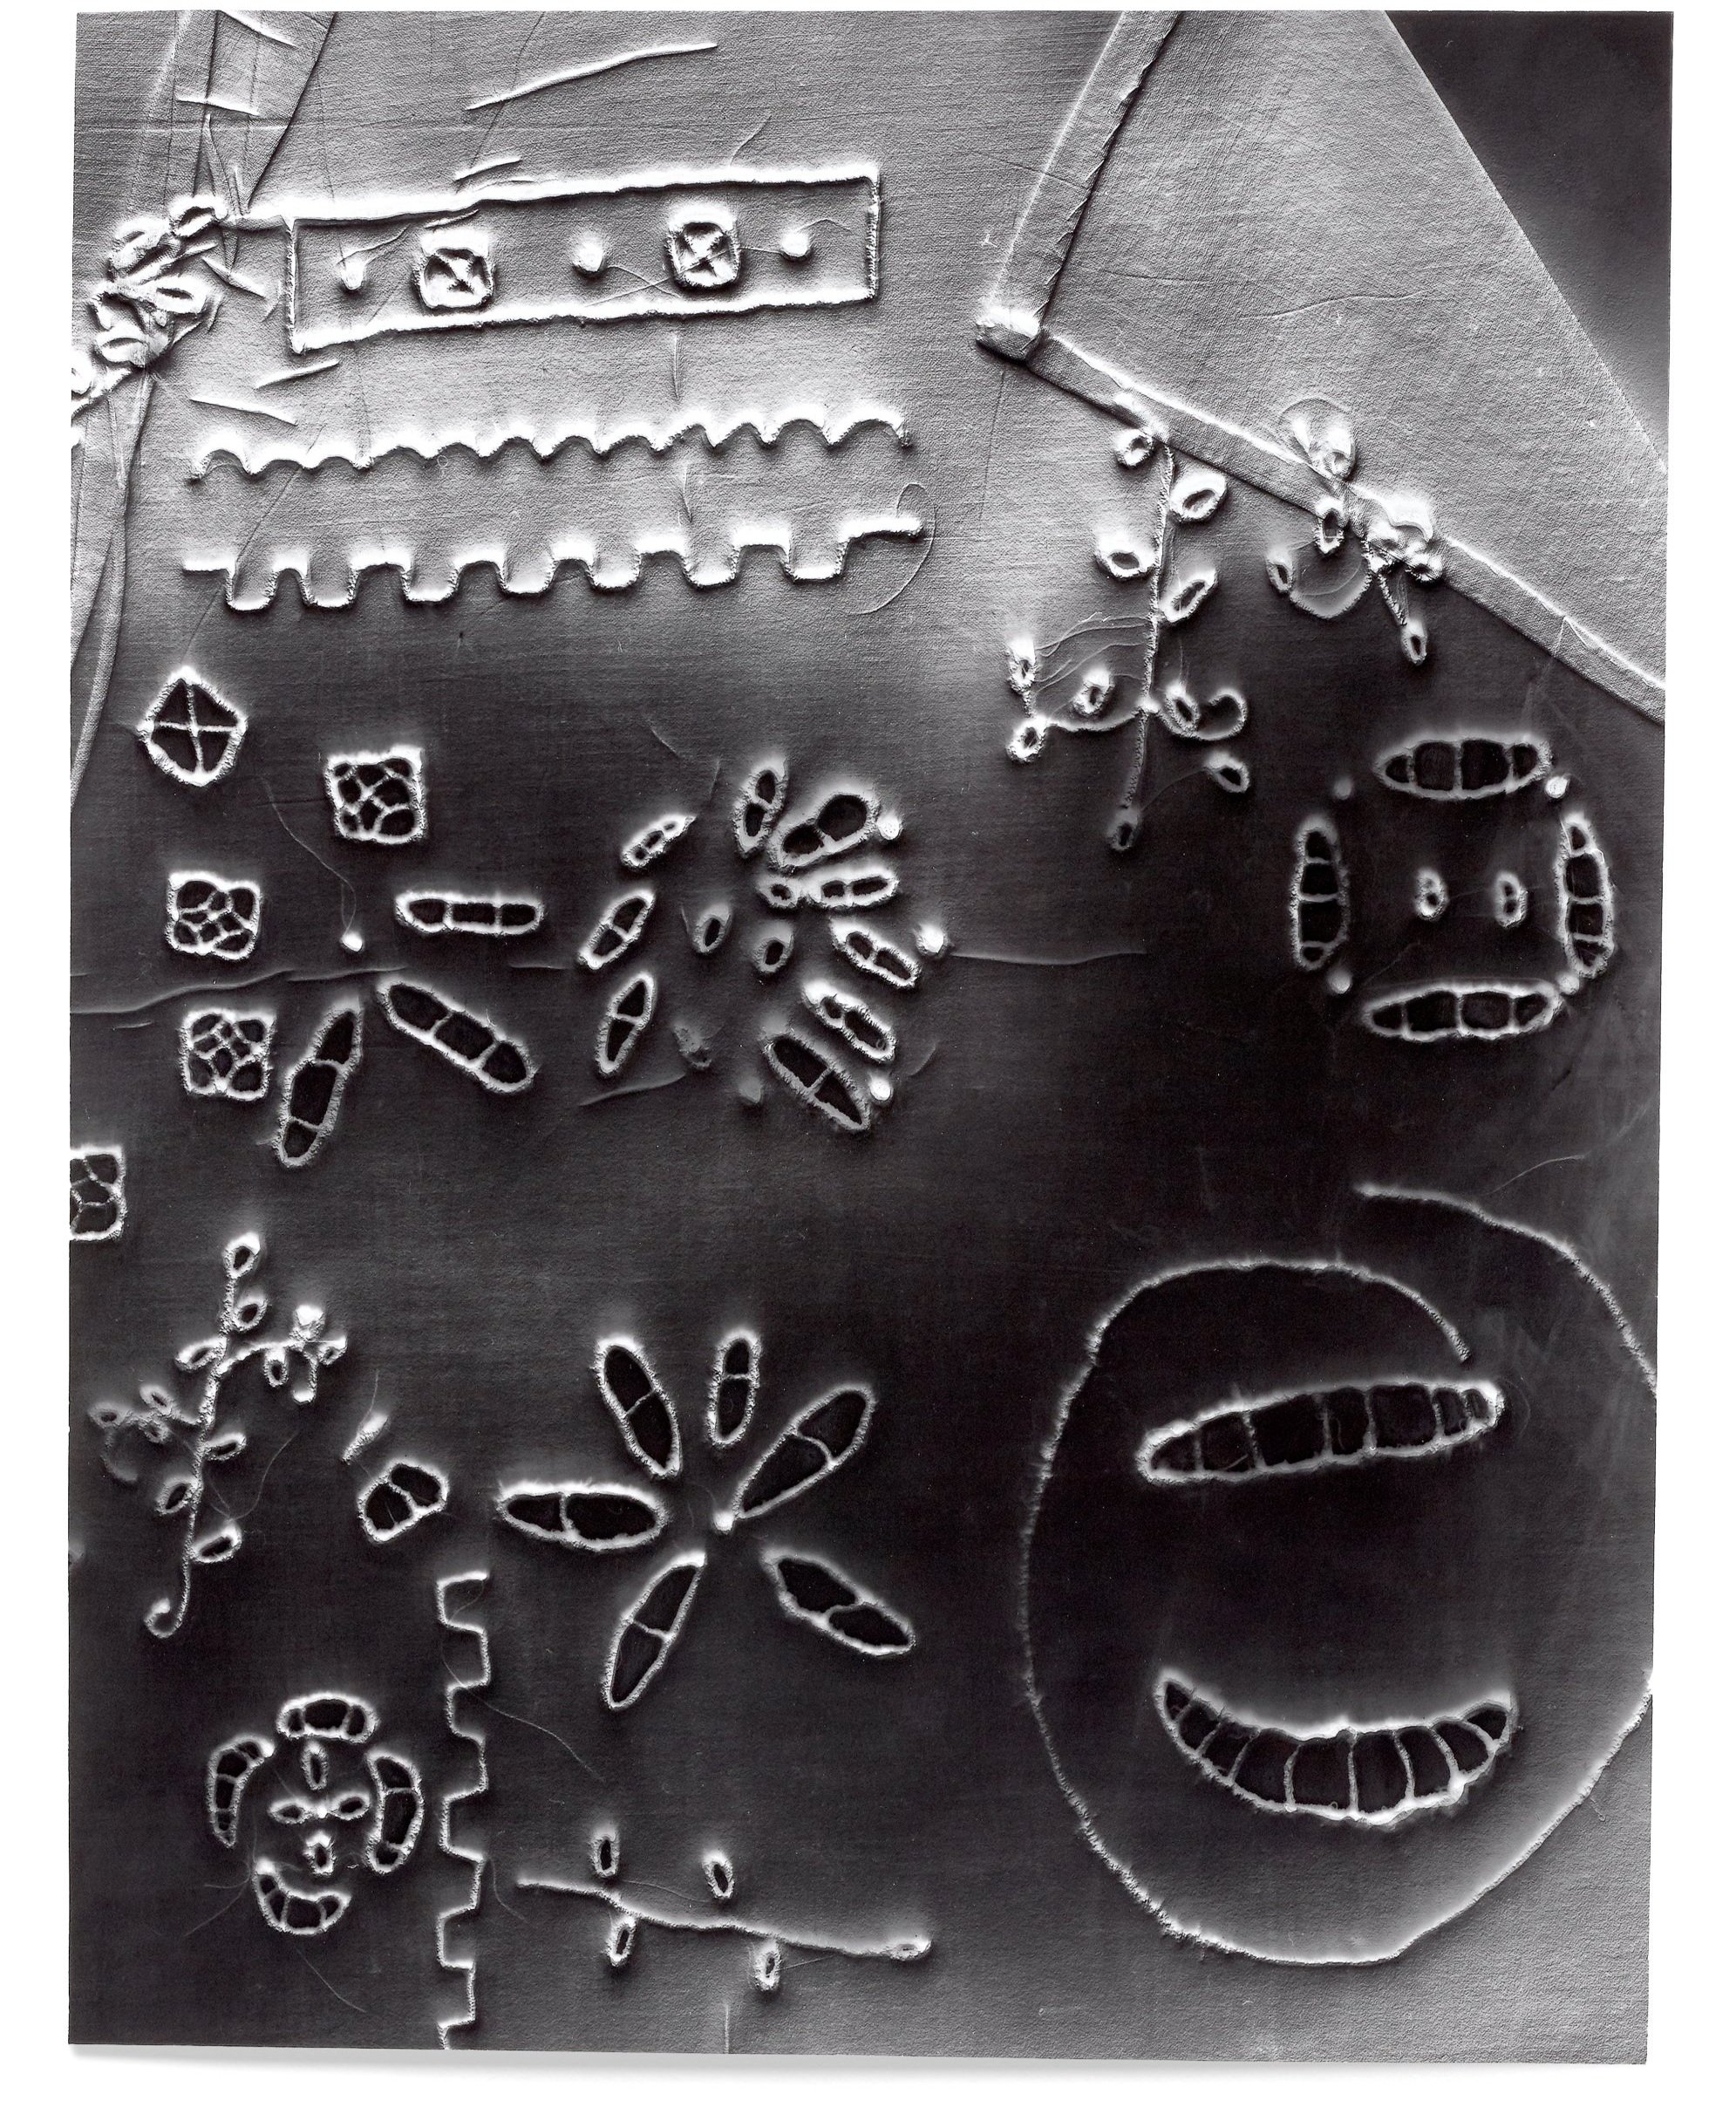   Anonymous 3,  2018 Photographic relief (embossed silver gelatin photogram) Impression of hand-embroidered cutwork sampler (United States, 1910s) 14 x 12 in 